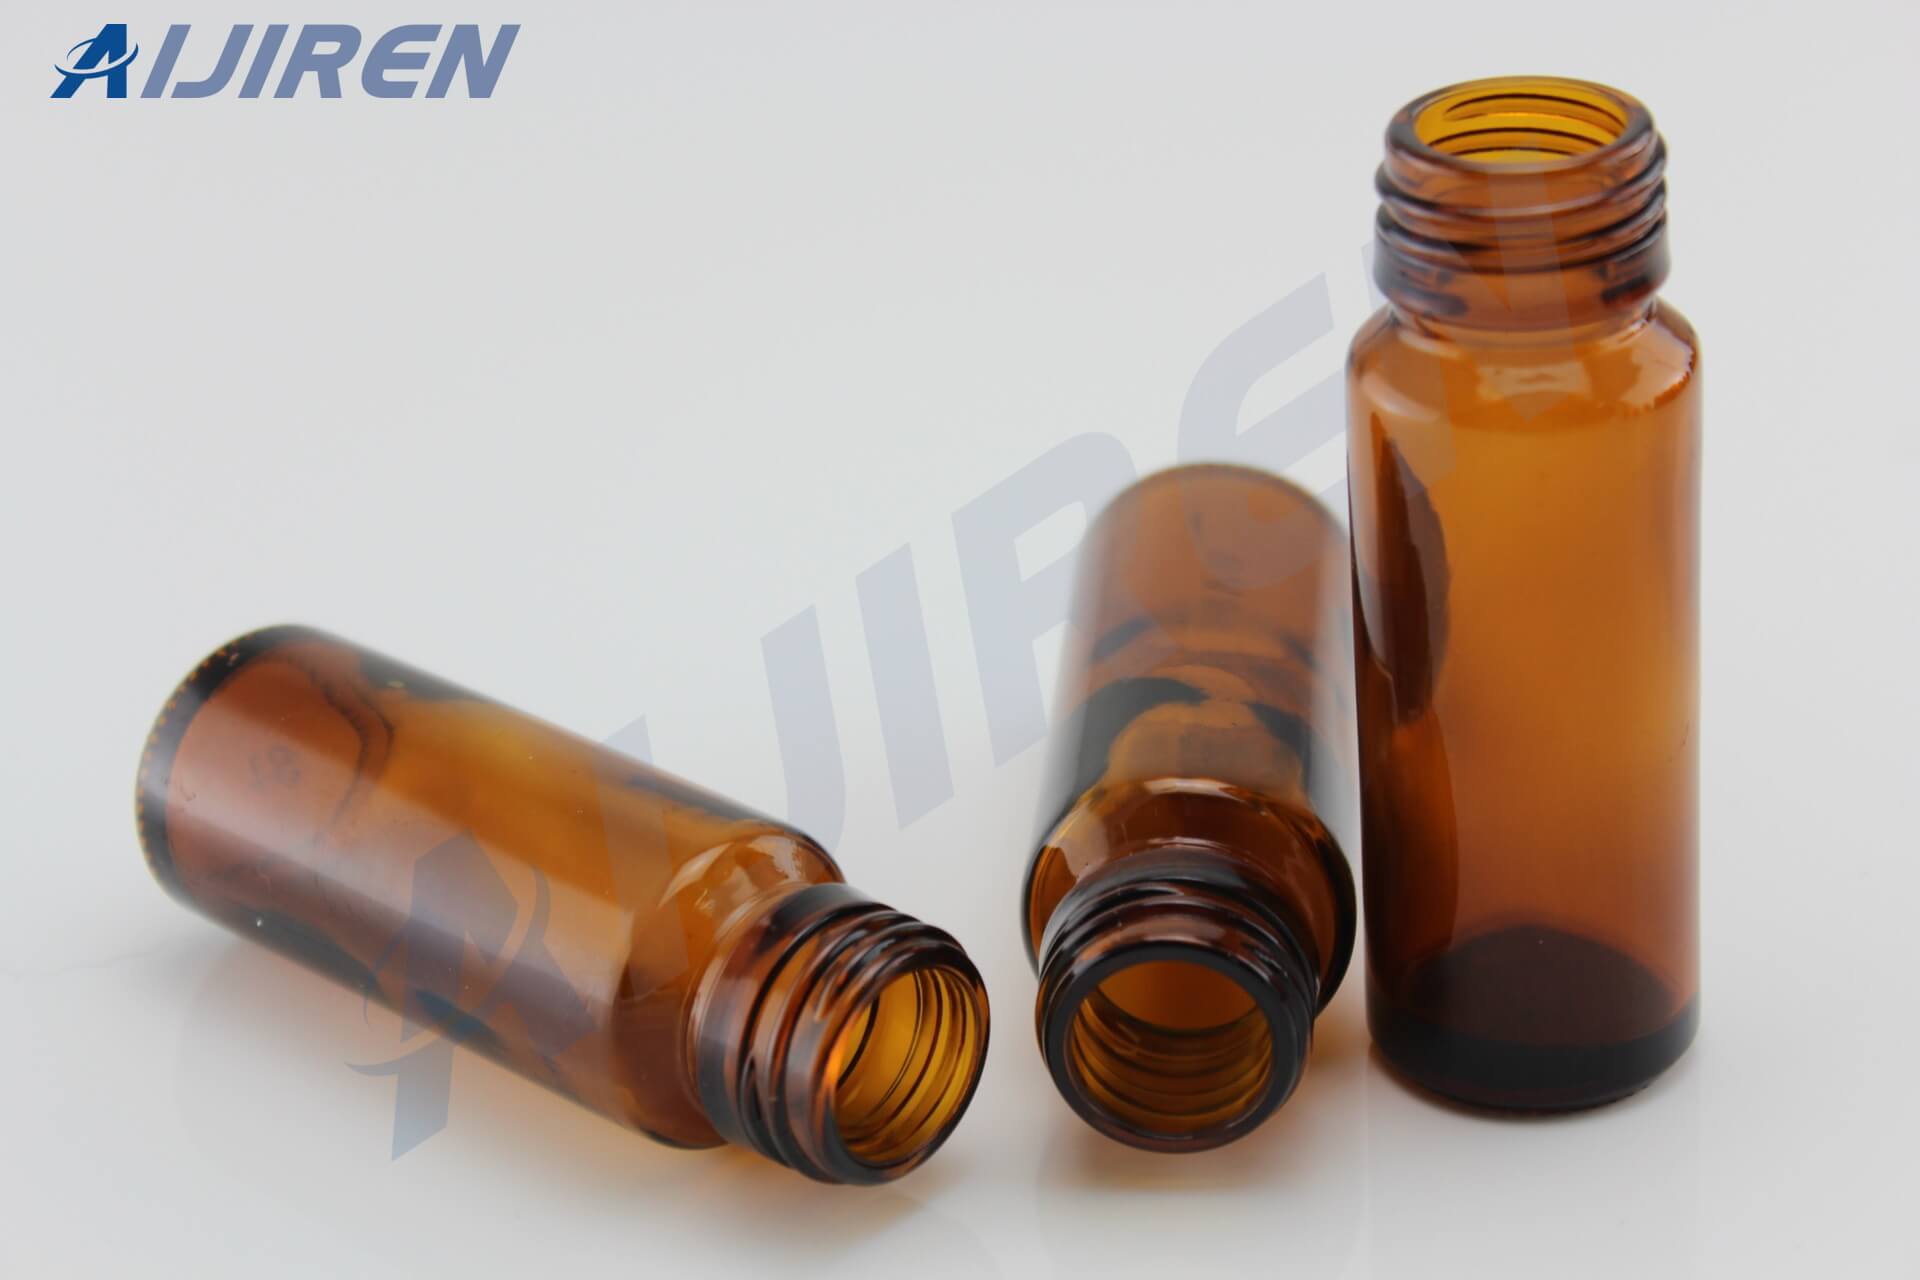 Fit Any Lab Screw Top Sample Storage Vial Supplier